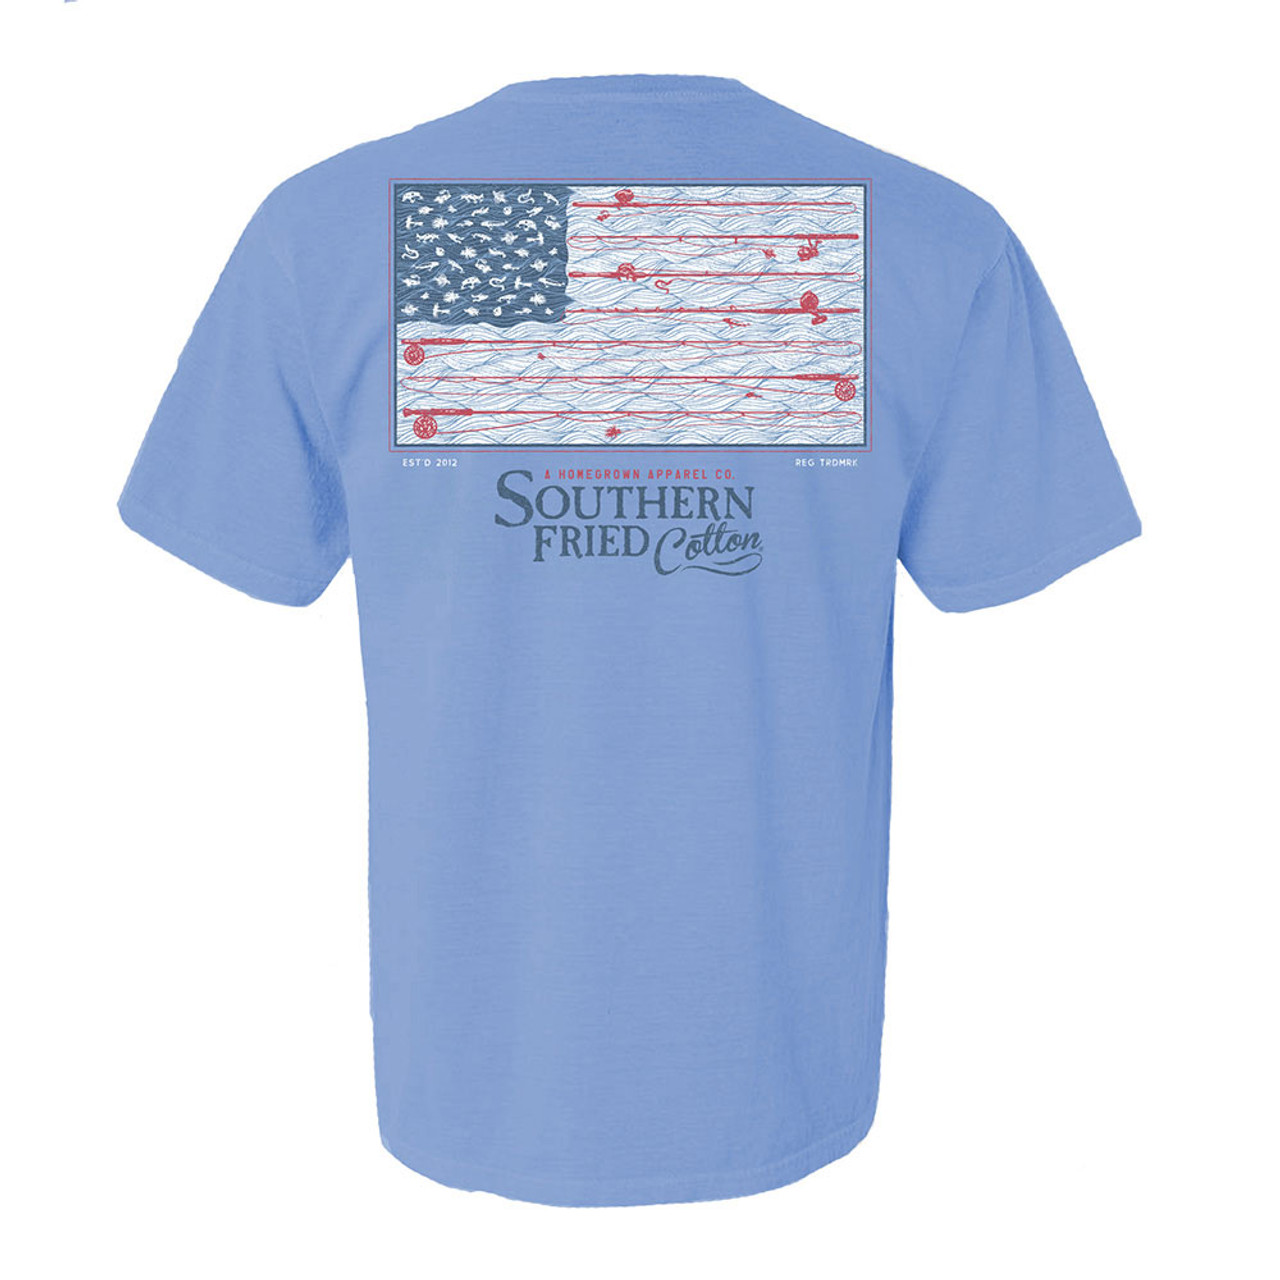 Southern Fried Cotton Men's Reel It in T-Shirt Size XXL - Washed Denim | Eagle Eye Outfitters